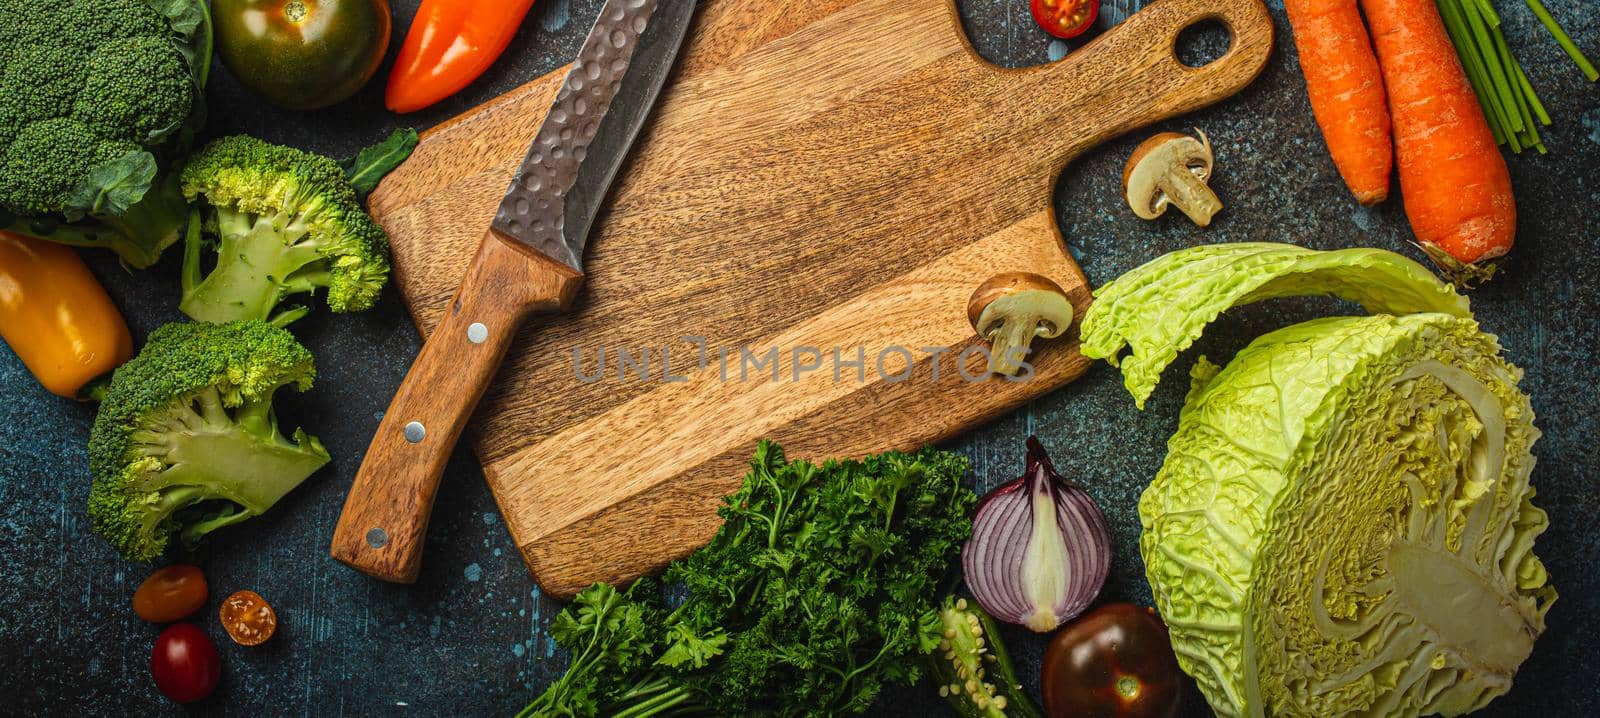 Assorted fresh vegetables on rustic concrete table with wooden cutting board in center and kitchen knife by its_al_dente